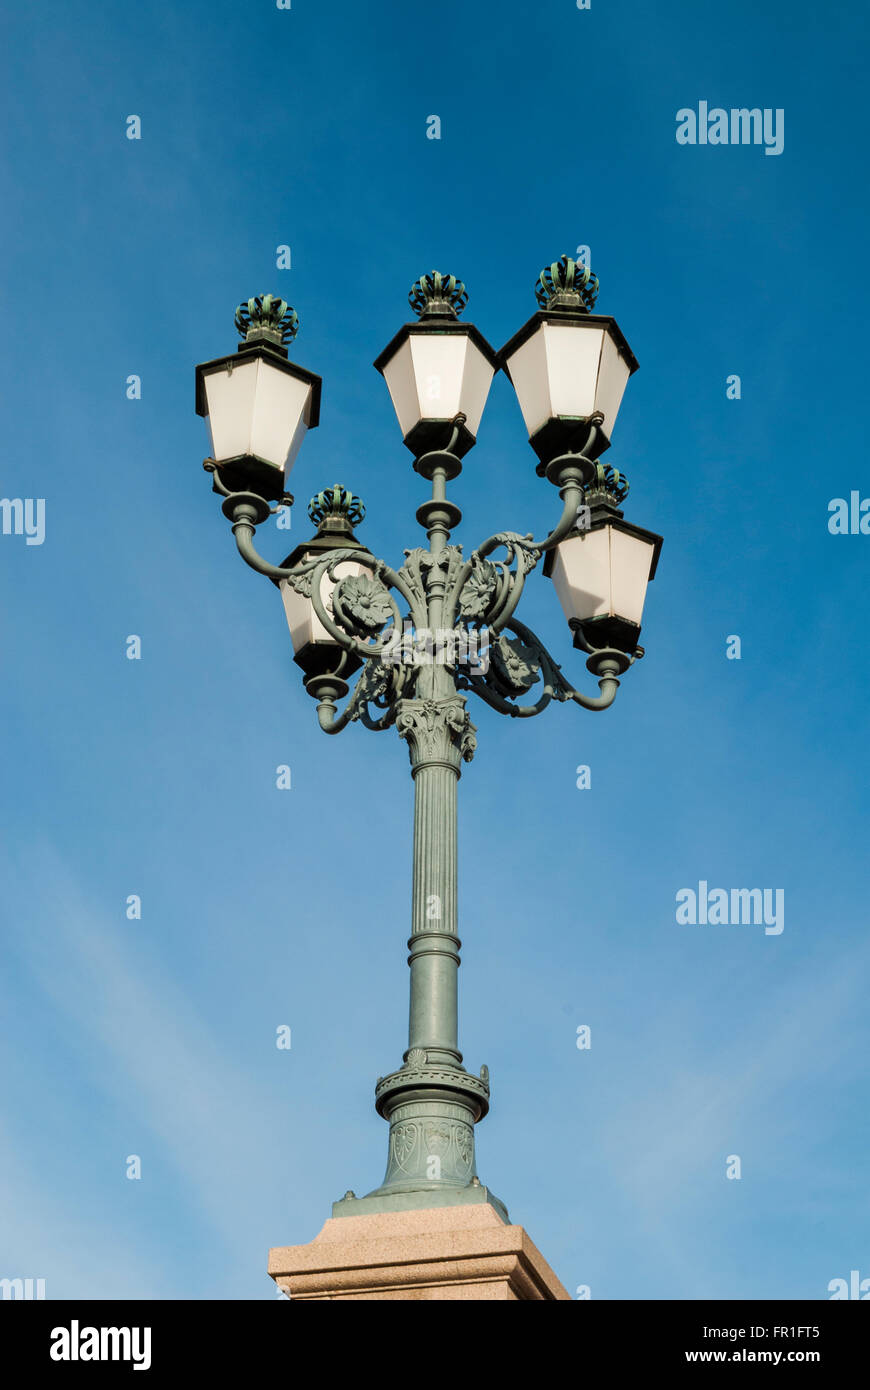 Lamppost outside the Royal Castle of Norway Stock Photo